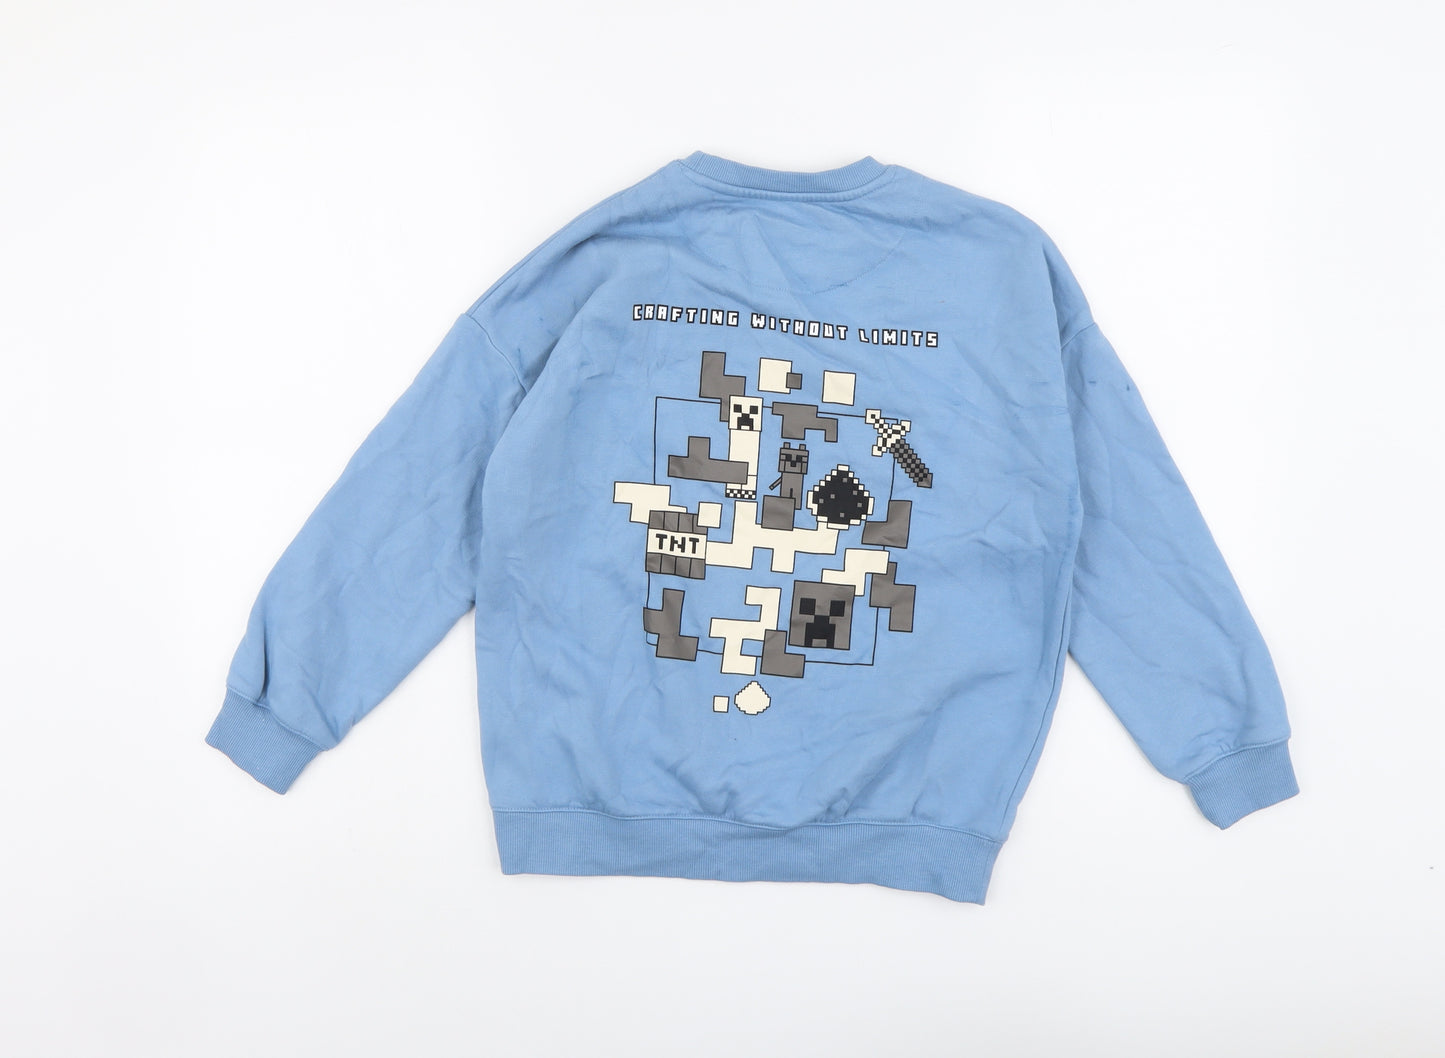 Marks and Spencer Boys Blue Cotton Pullover Sweatshirt Size 9-10 Years Pullover - Minecraft